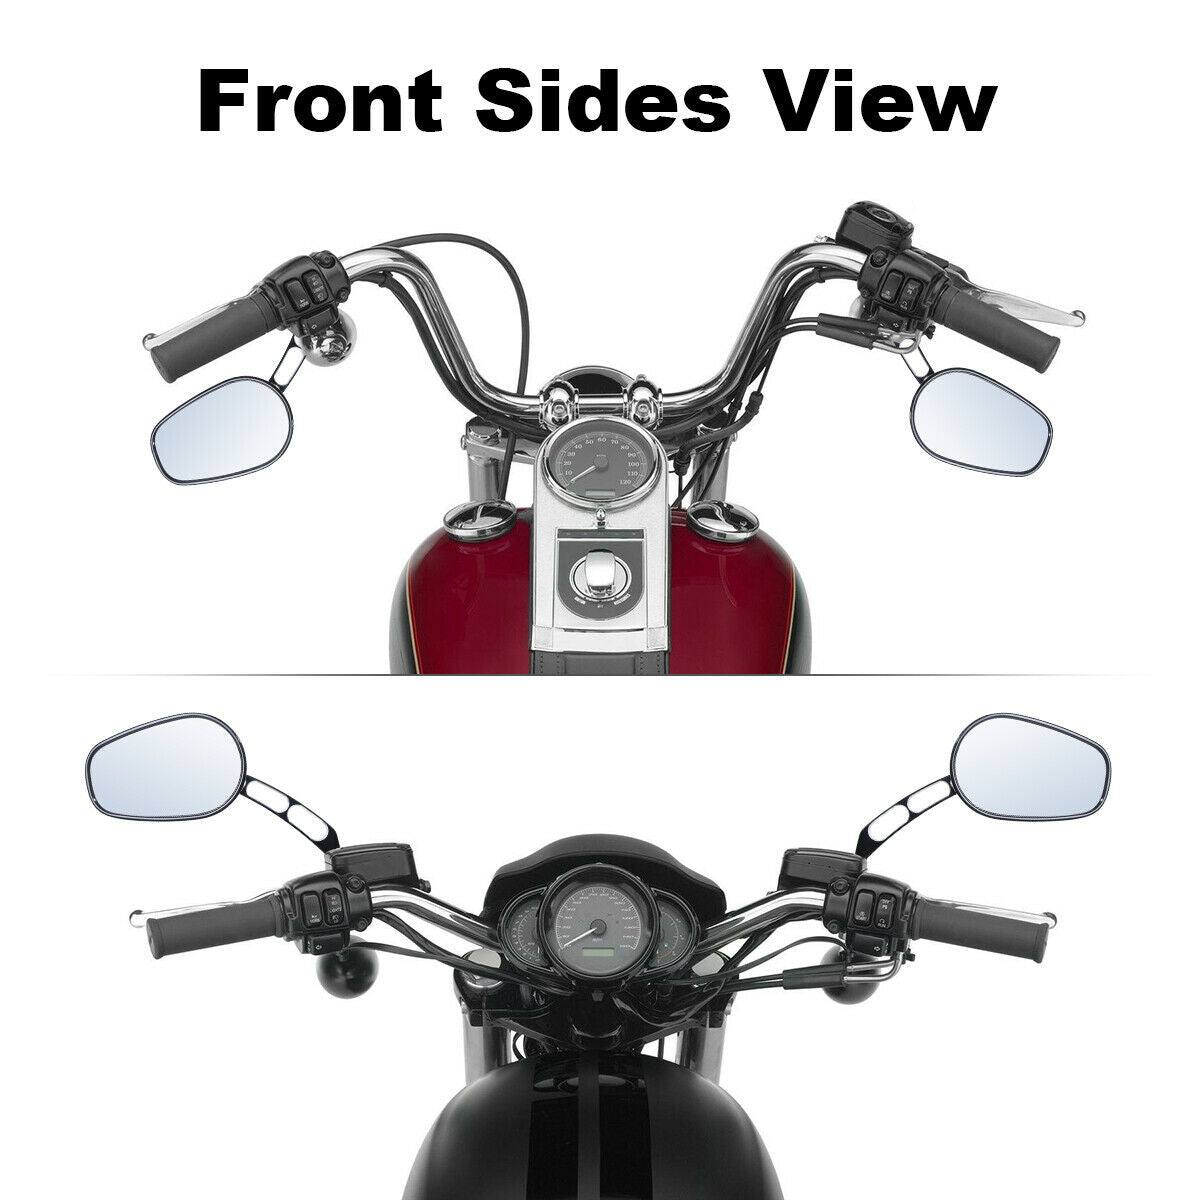 Rear View Mirror Black For Harley Dyna Fat Boy Softail XL Road King Street Glide - Moto Life Products